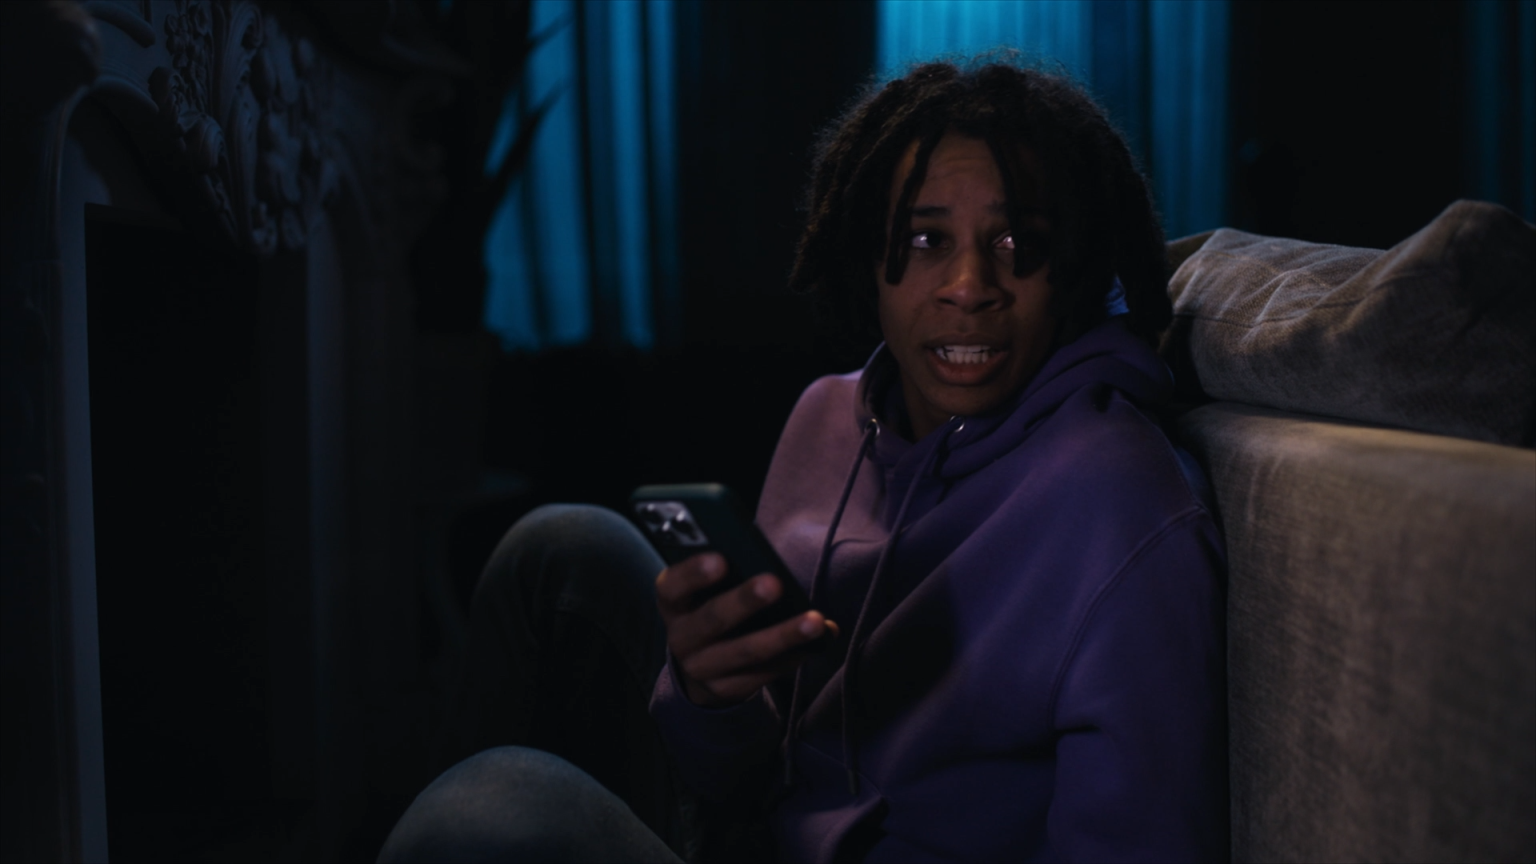 Still from 'Telefoonstalker', episode 13 of Broodje Aap. It's a medium shot of a Black teenaged guy, with braids and a purple hoodie, sitting behind a couch. He's holding his phone and looking anxiously over his shoulder. The room is dark.